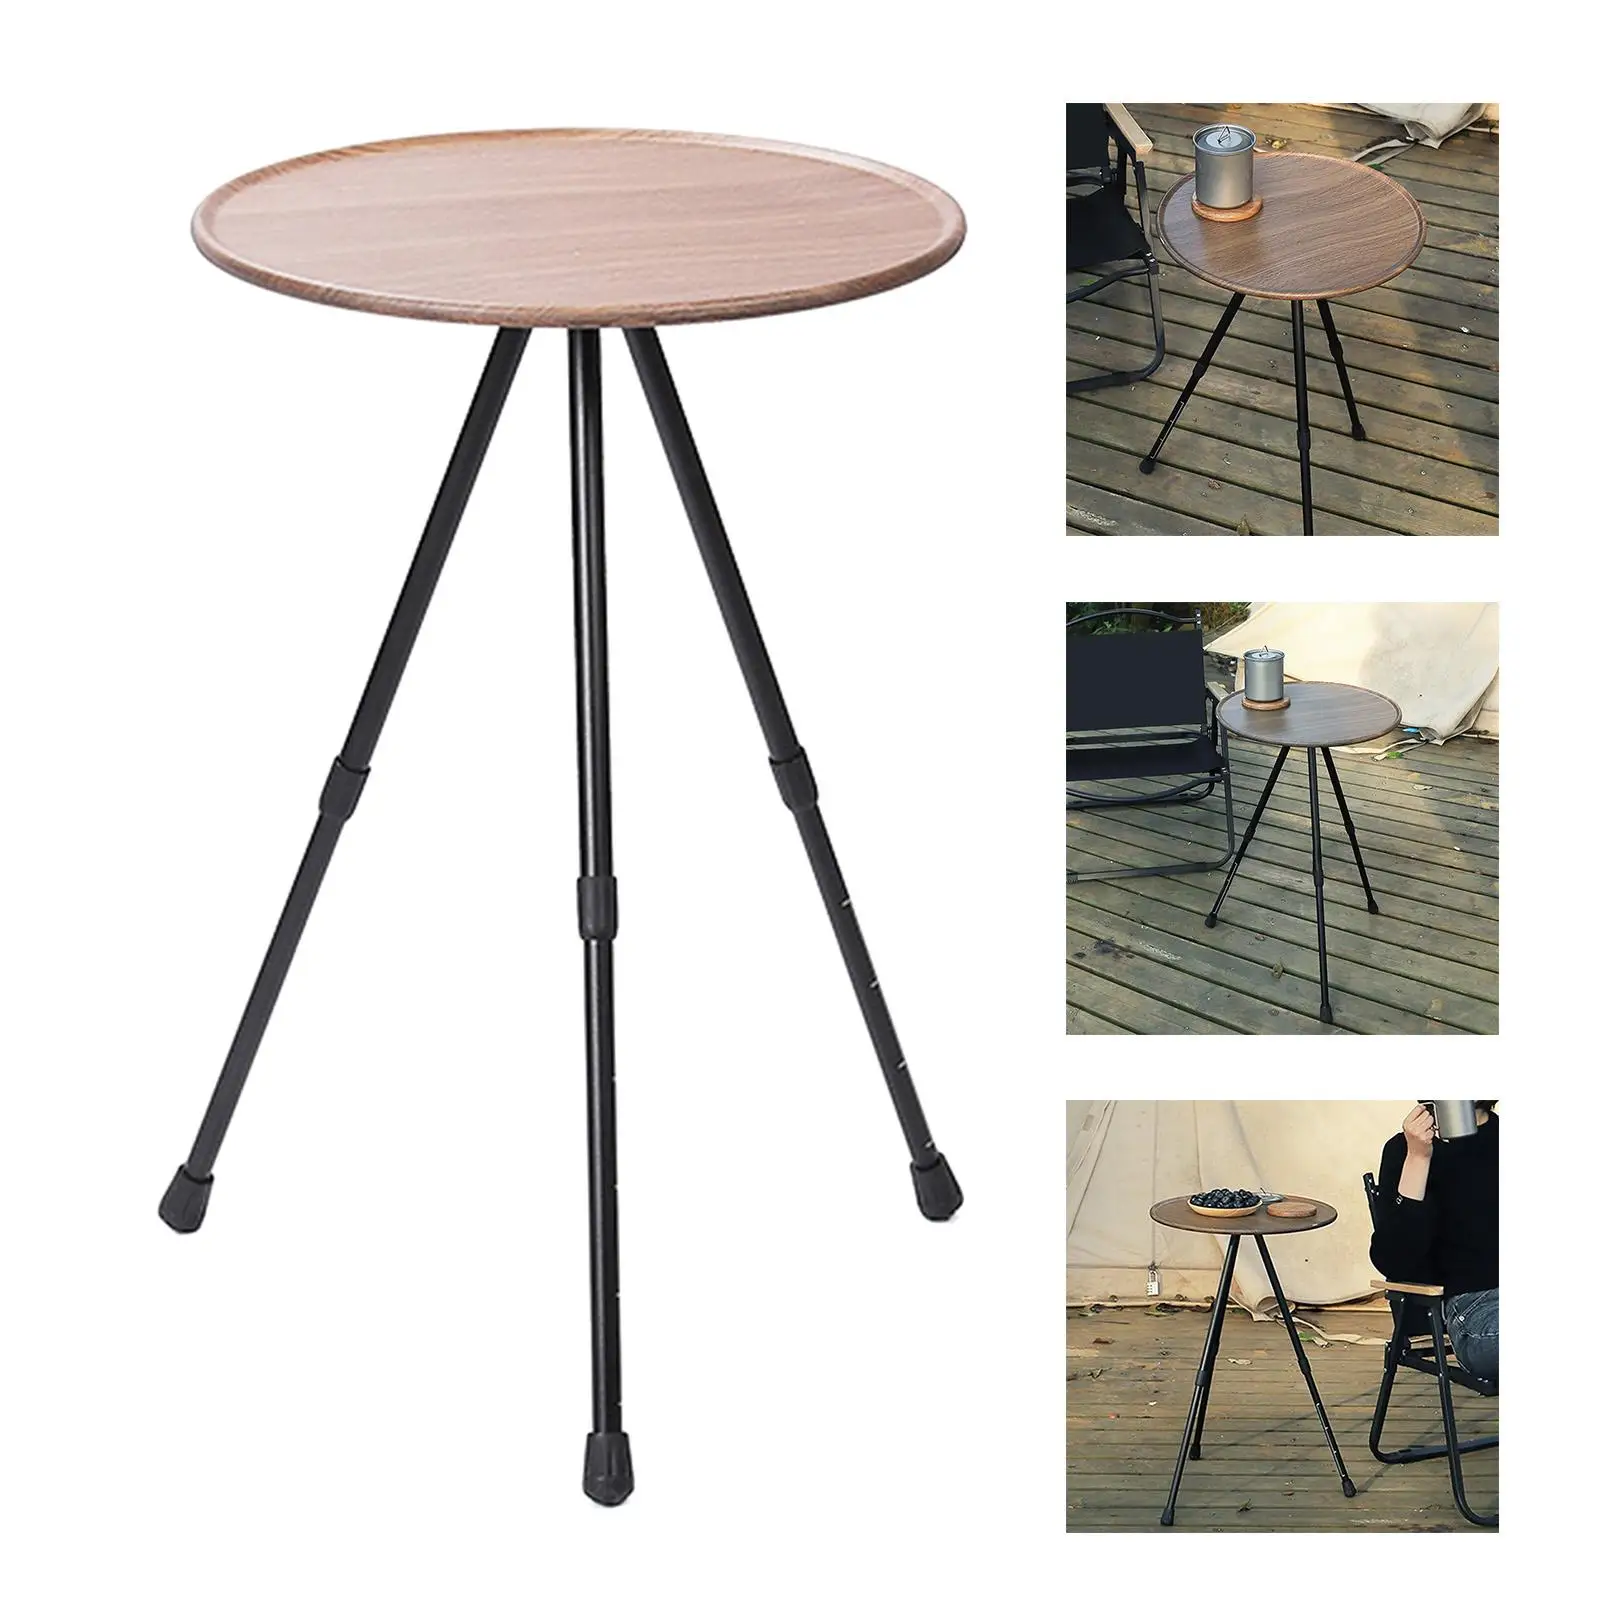 Foldable Camping Table Retractable Aluminum Alloy Three-Legged Dining Table Multifunctional for Camping Picnic Outdoor